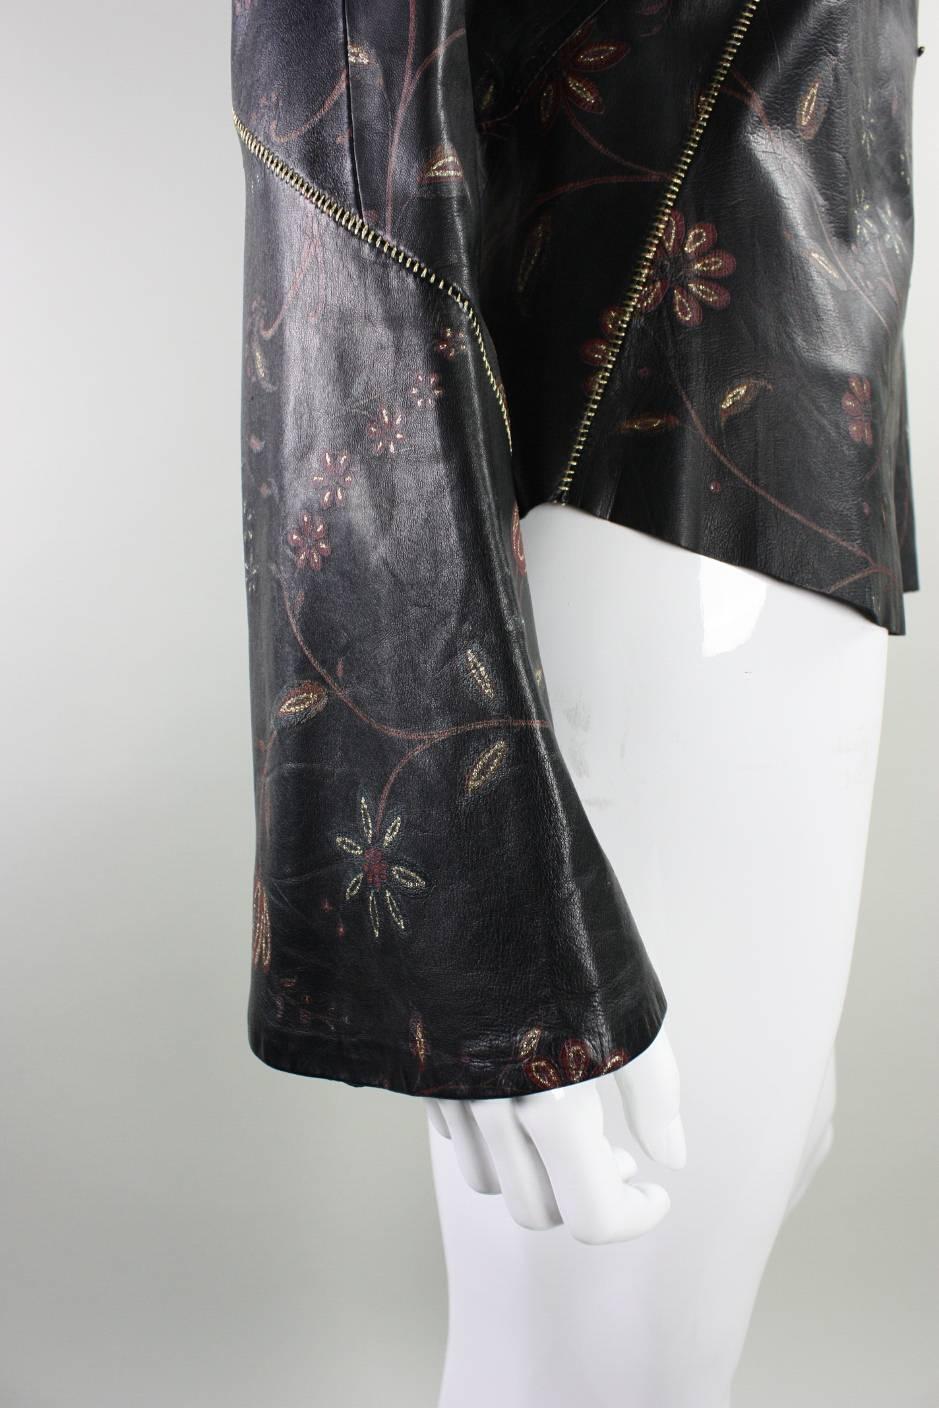 Roberto Cavalli Leather Blouse or Jacket with Gold Stitching For Sale 1